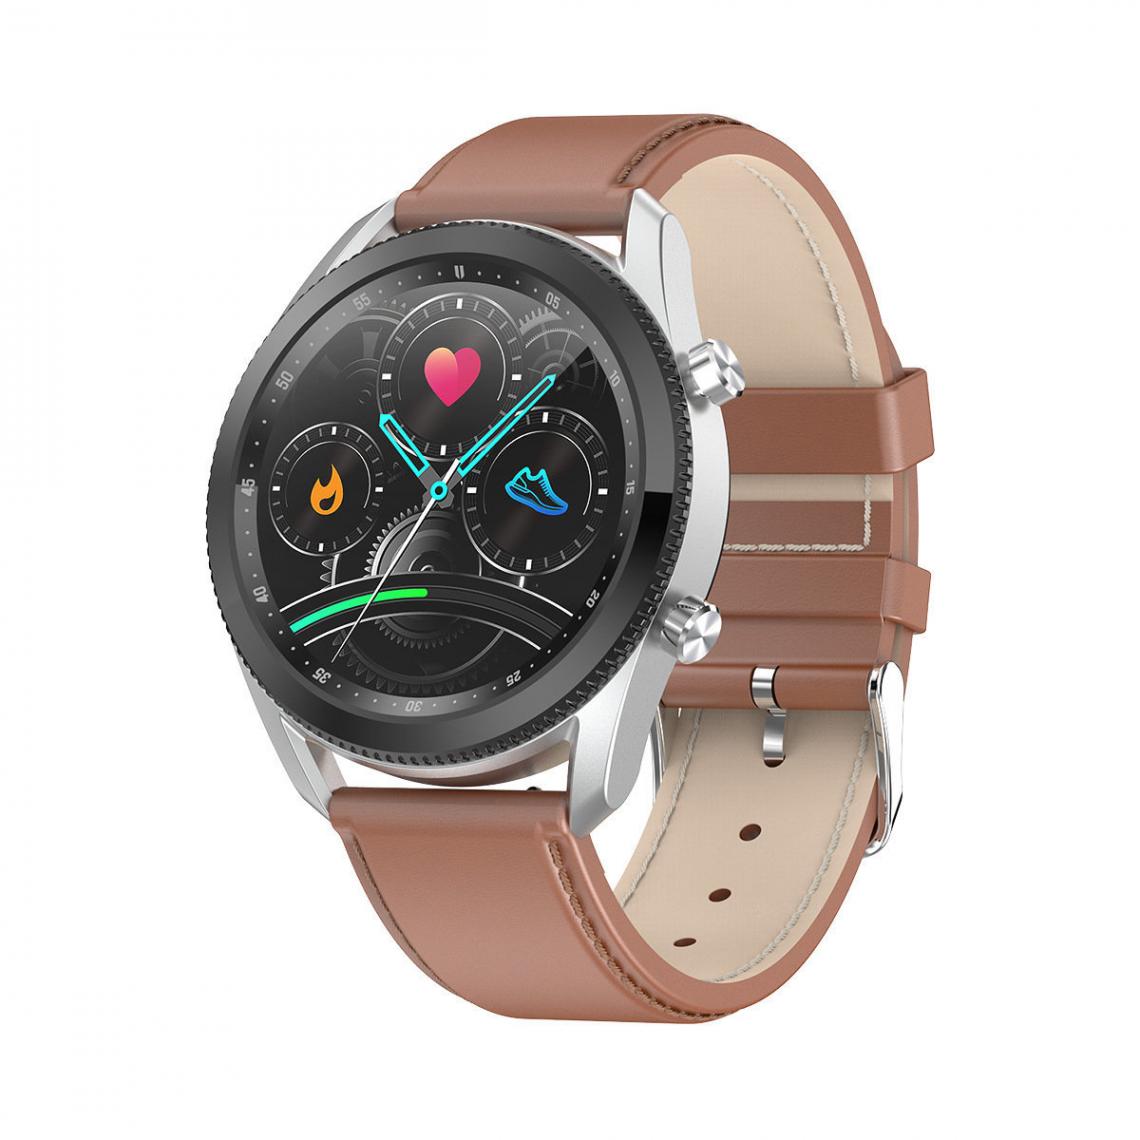 Chronotech Montres - Chronus Waterproof Smart Watch Full HD Touch Screen Sport Band with Multi Usage Heart Rate Detection(Brown) - Montre connectée